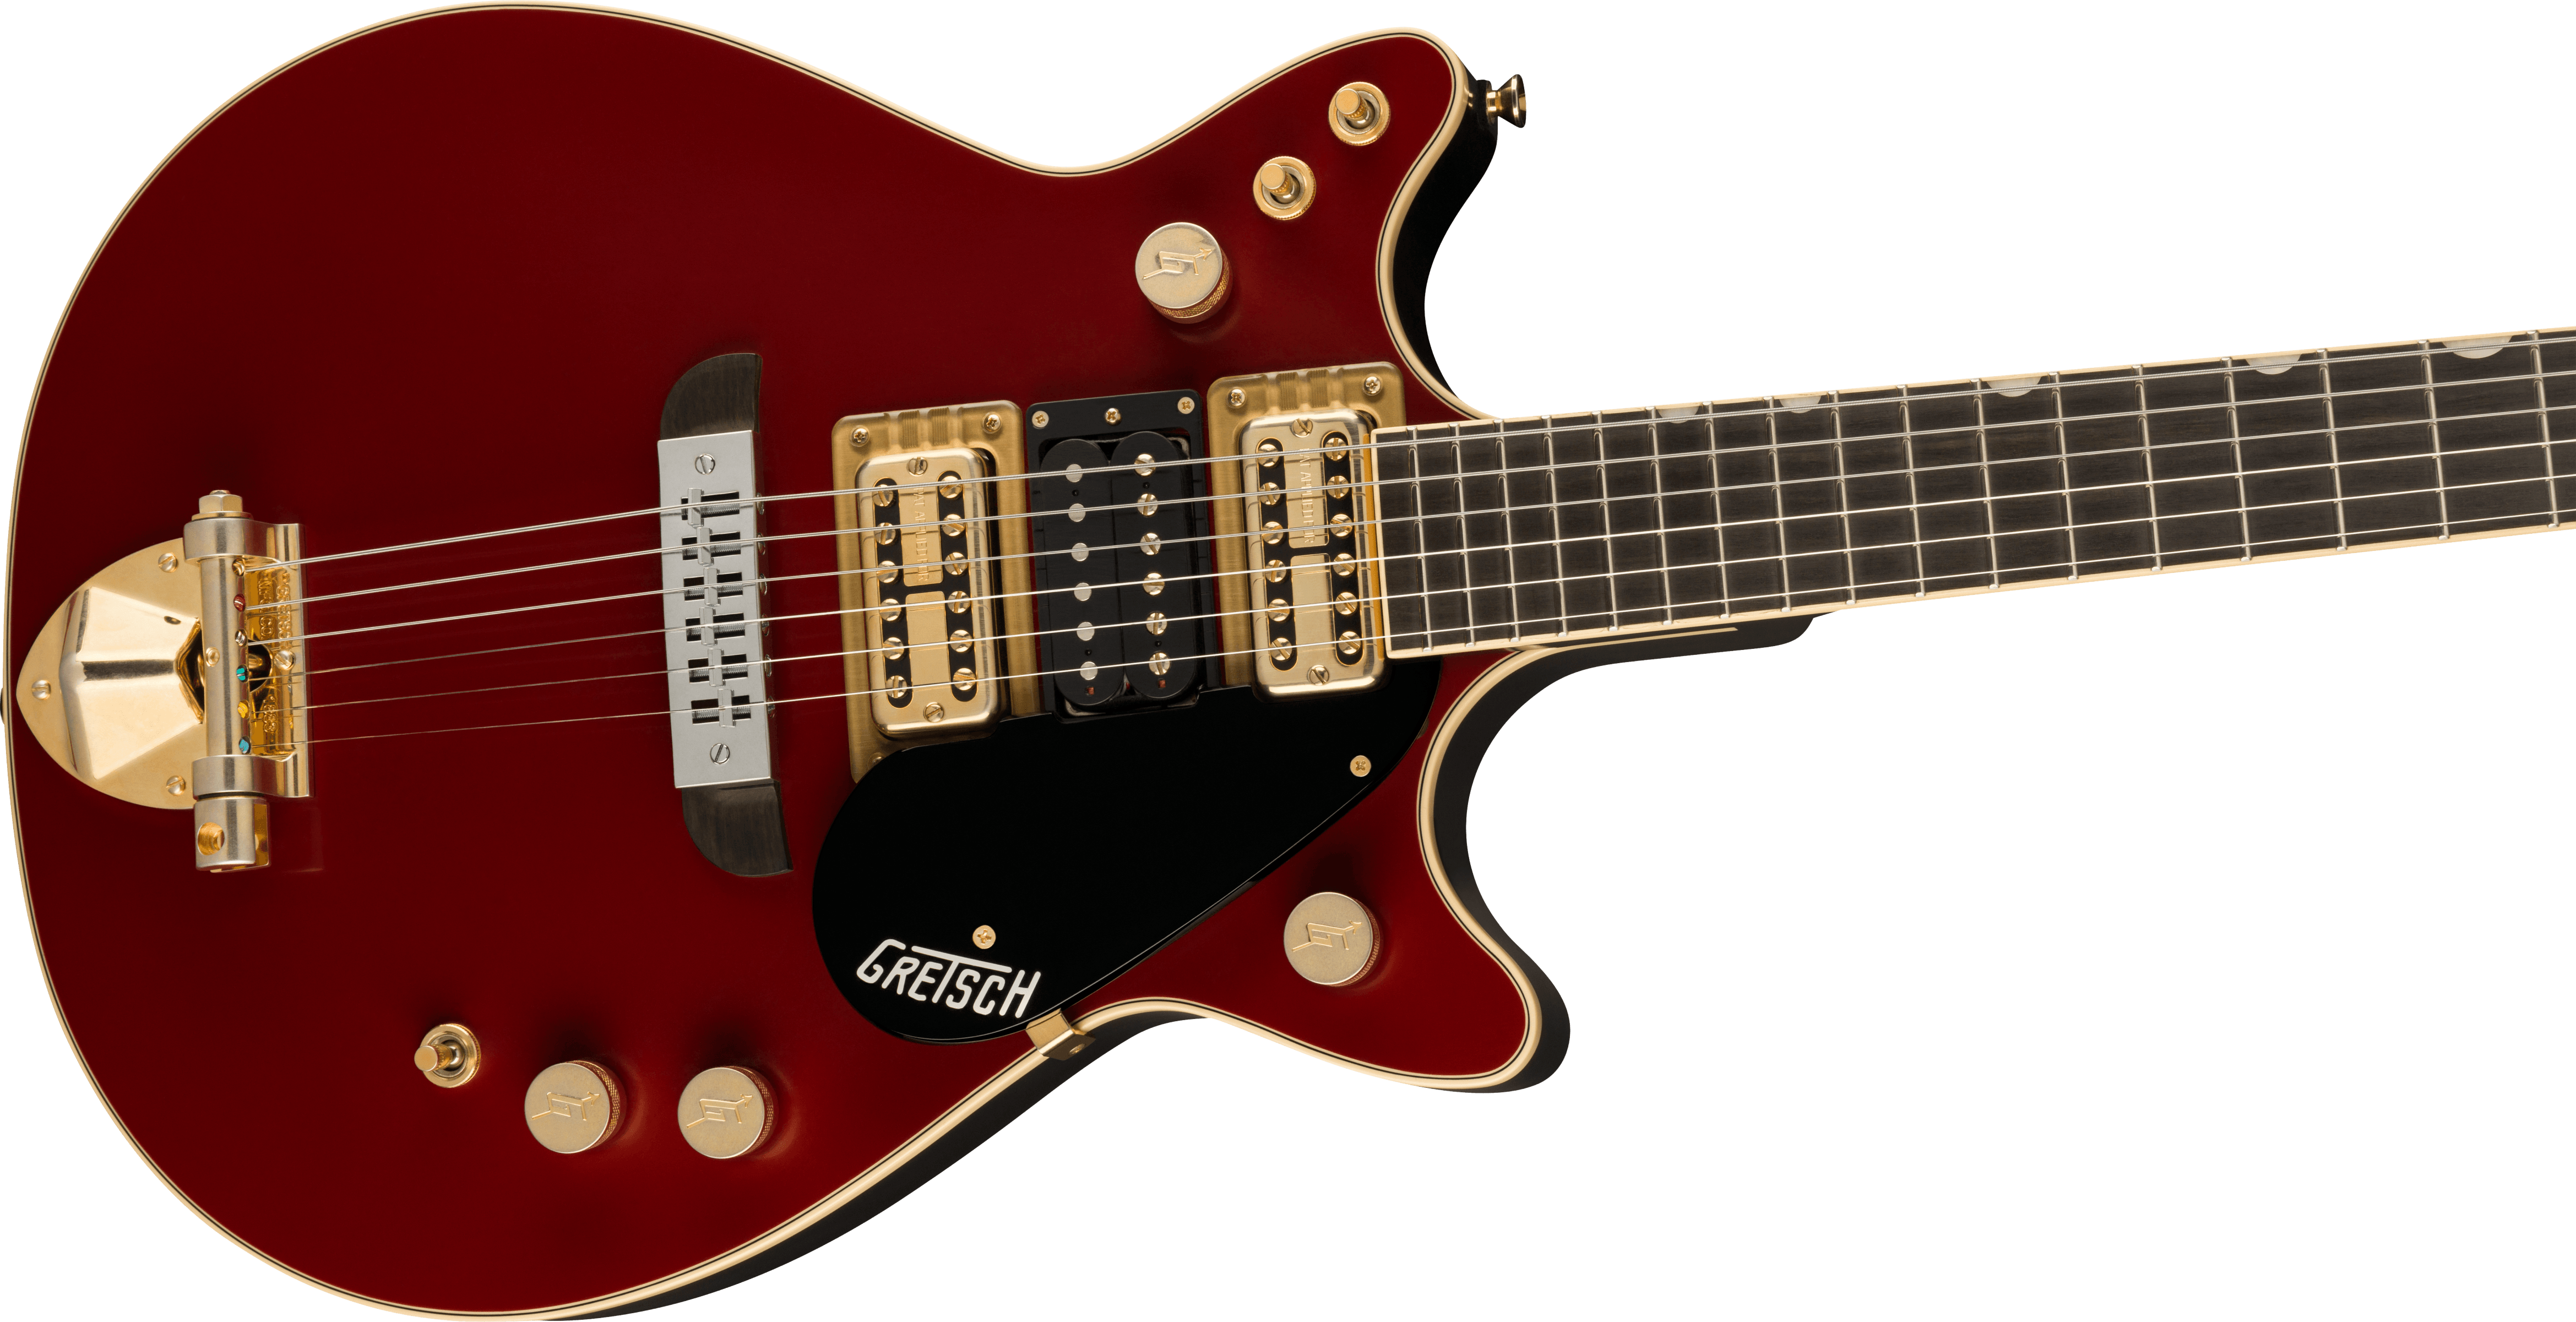 GRETSCH G6131-MY-RB Limited Edition Malcolm Young Signature Jet Ebony Fingerboard, Vintage Firebird Red 2411916845